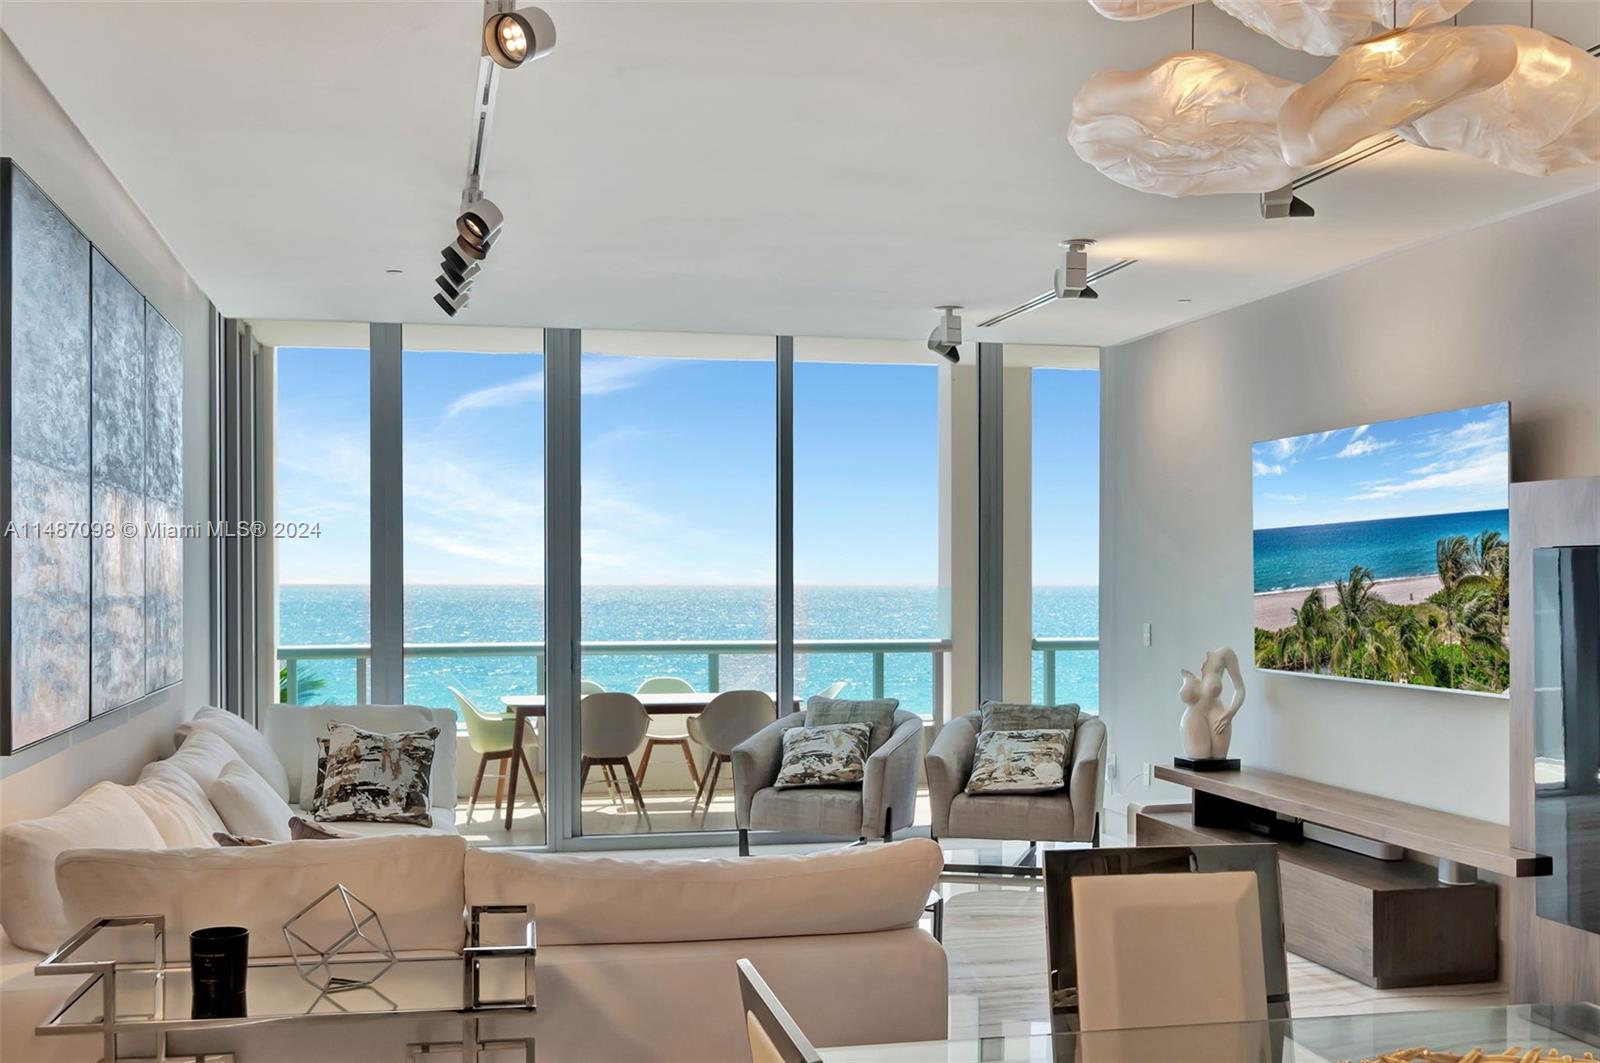 Listing Image 6799 Collins Ave #406